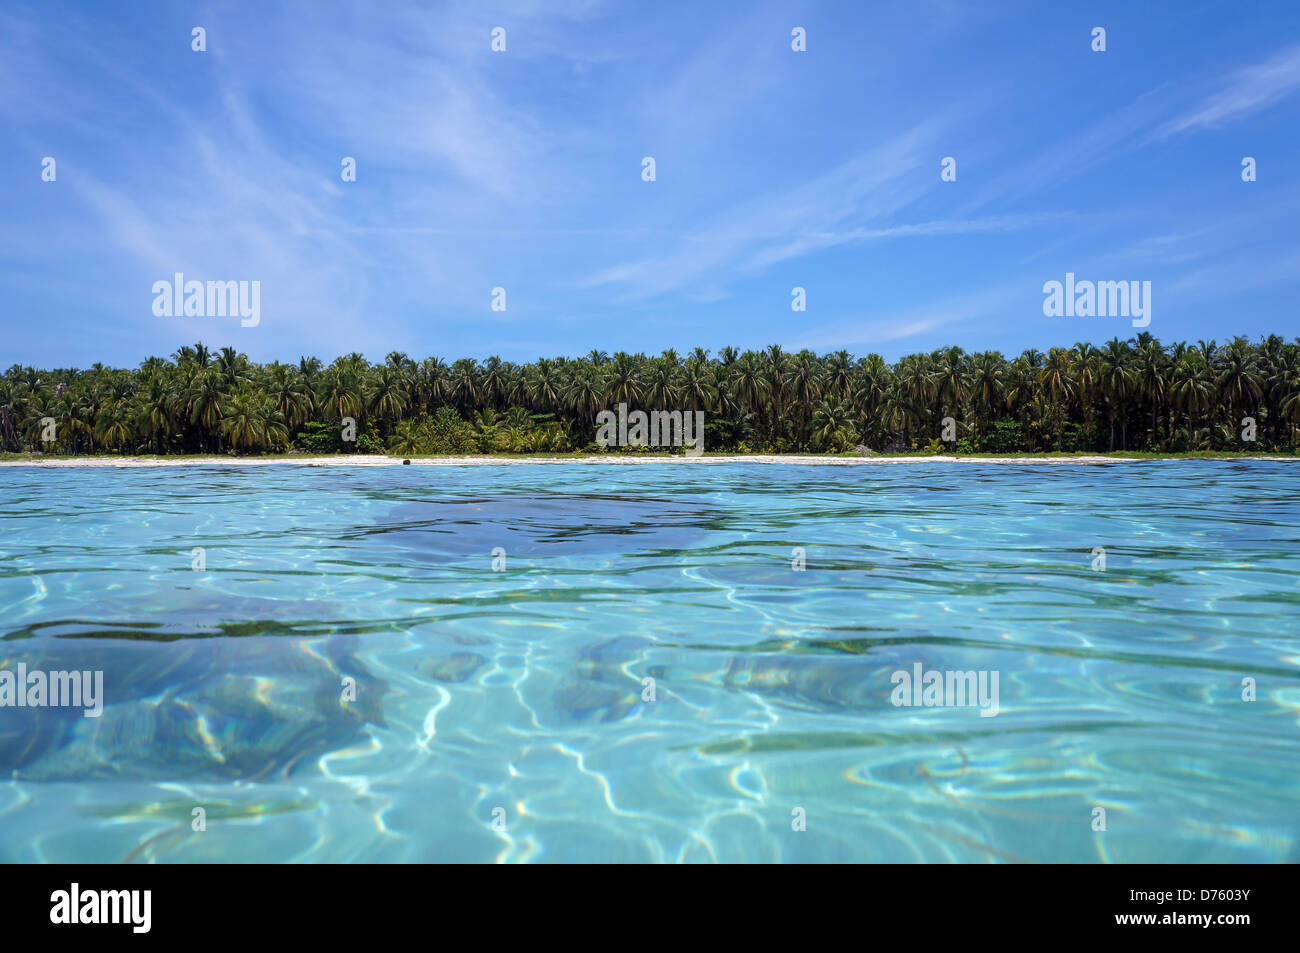 Tropical coastline with lush coconut trees at the horizon and turquoise water surface, Zapatillas islands, Caribbean sea, Panama Stock Photo